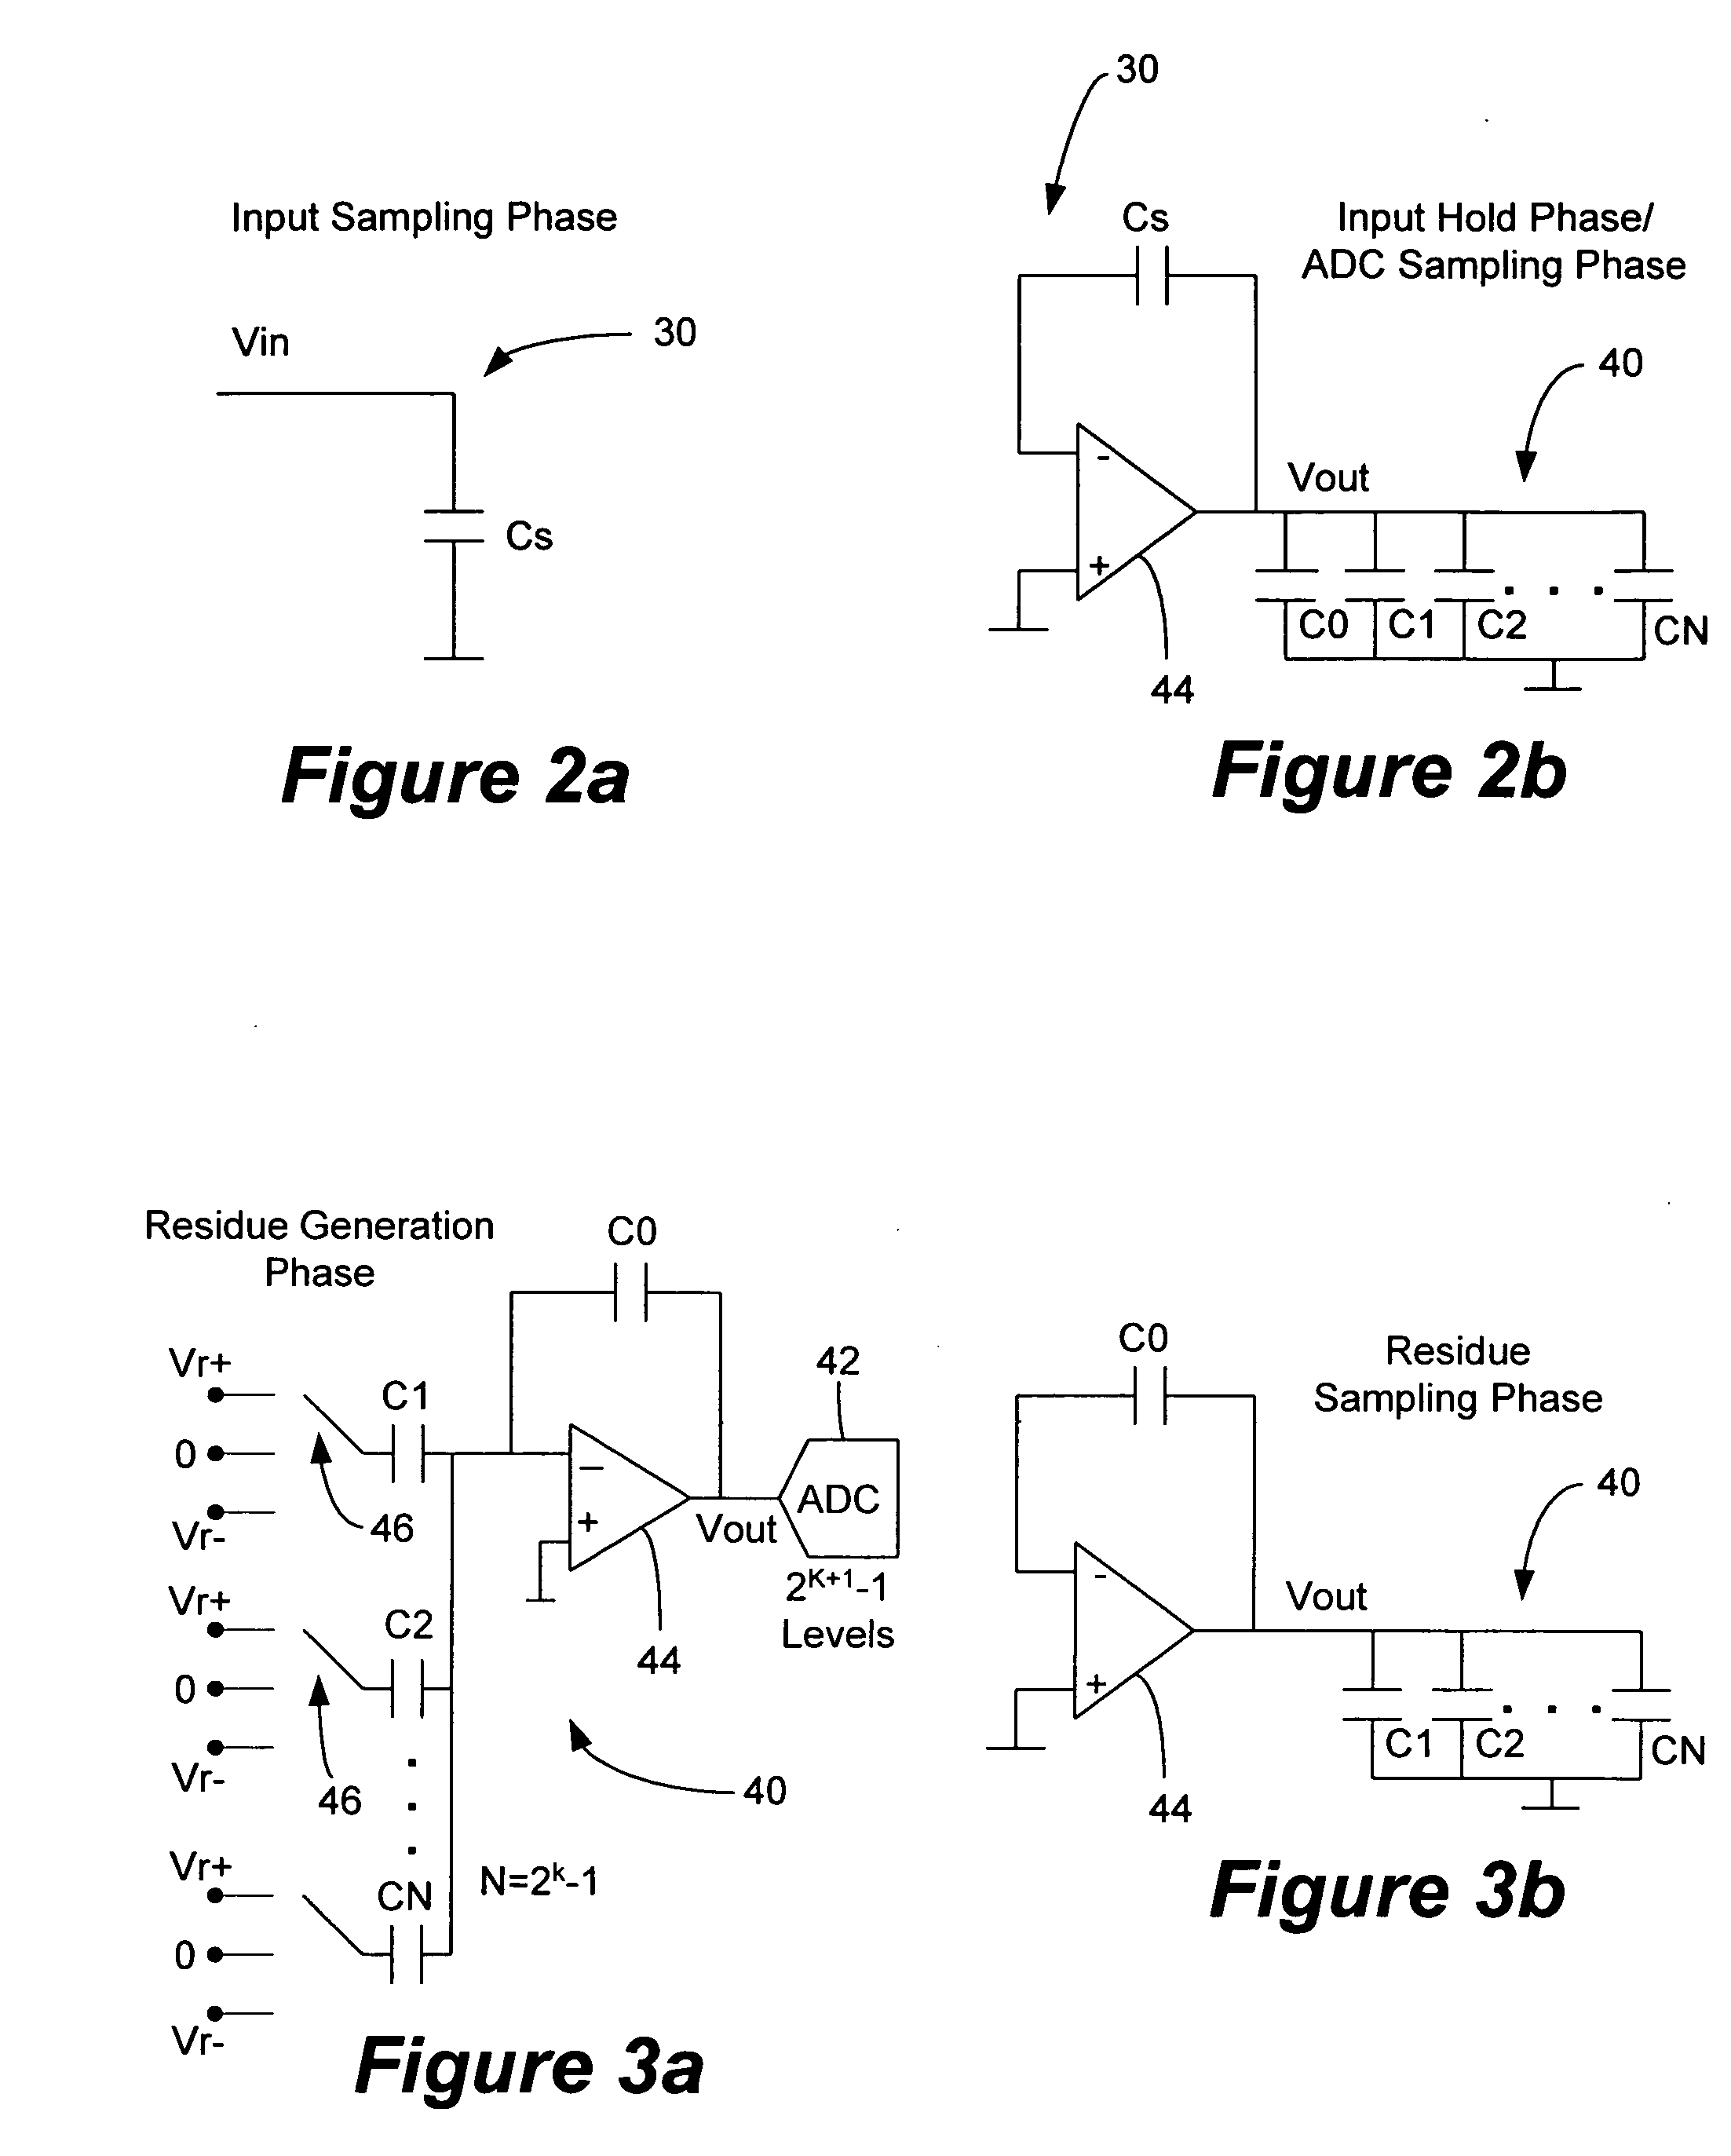 Architecture for an algorithmic analog-to-digital converter